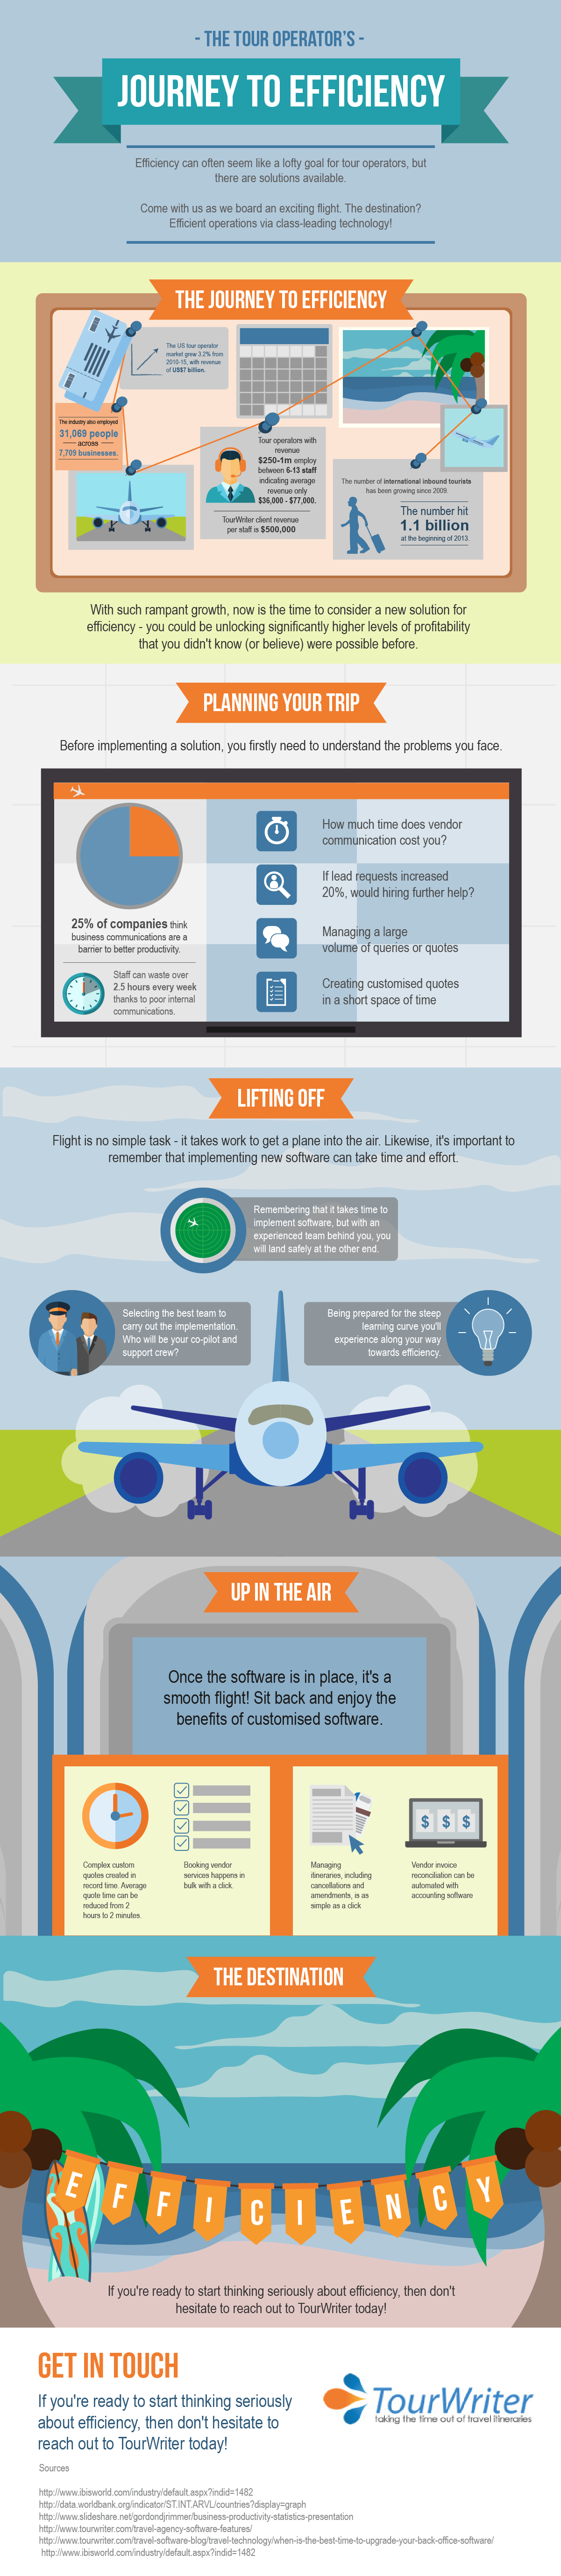 Infographic-tour operator journey to efficiency